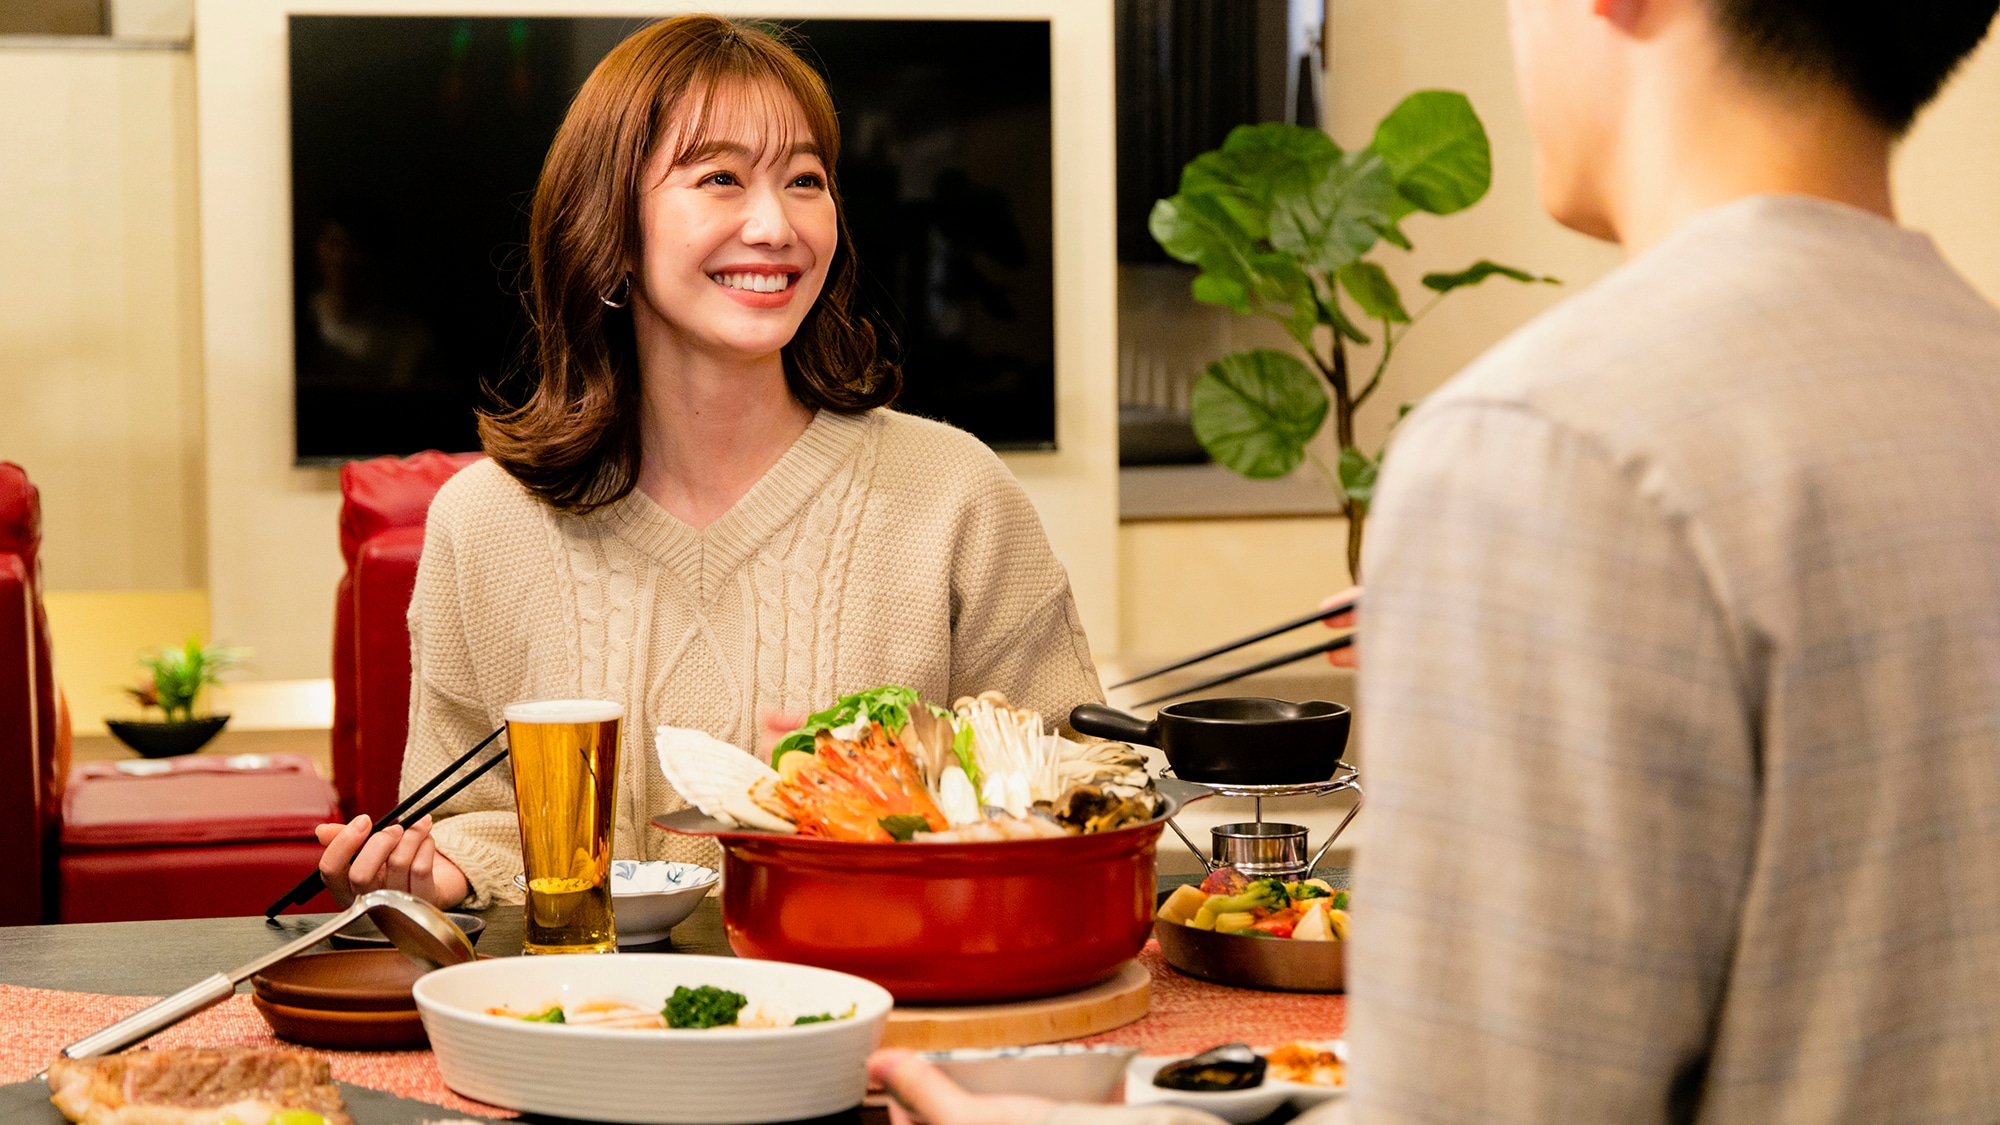 All rooms are available for meals ☆ You can relax with your loved ones without worrying about time or glance ♪